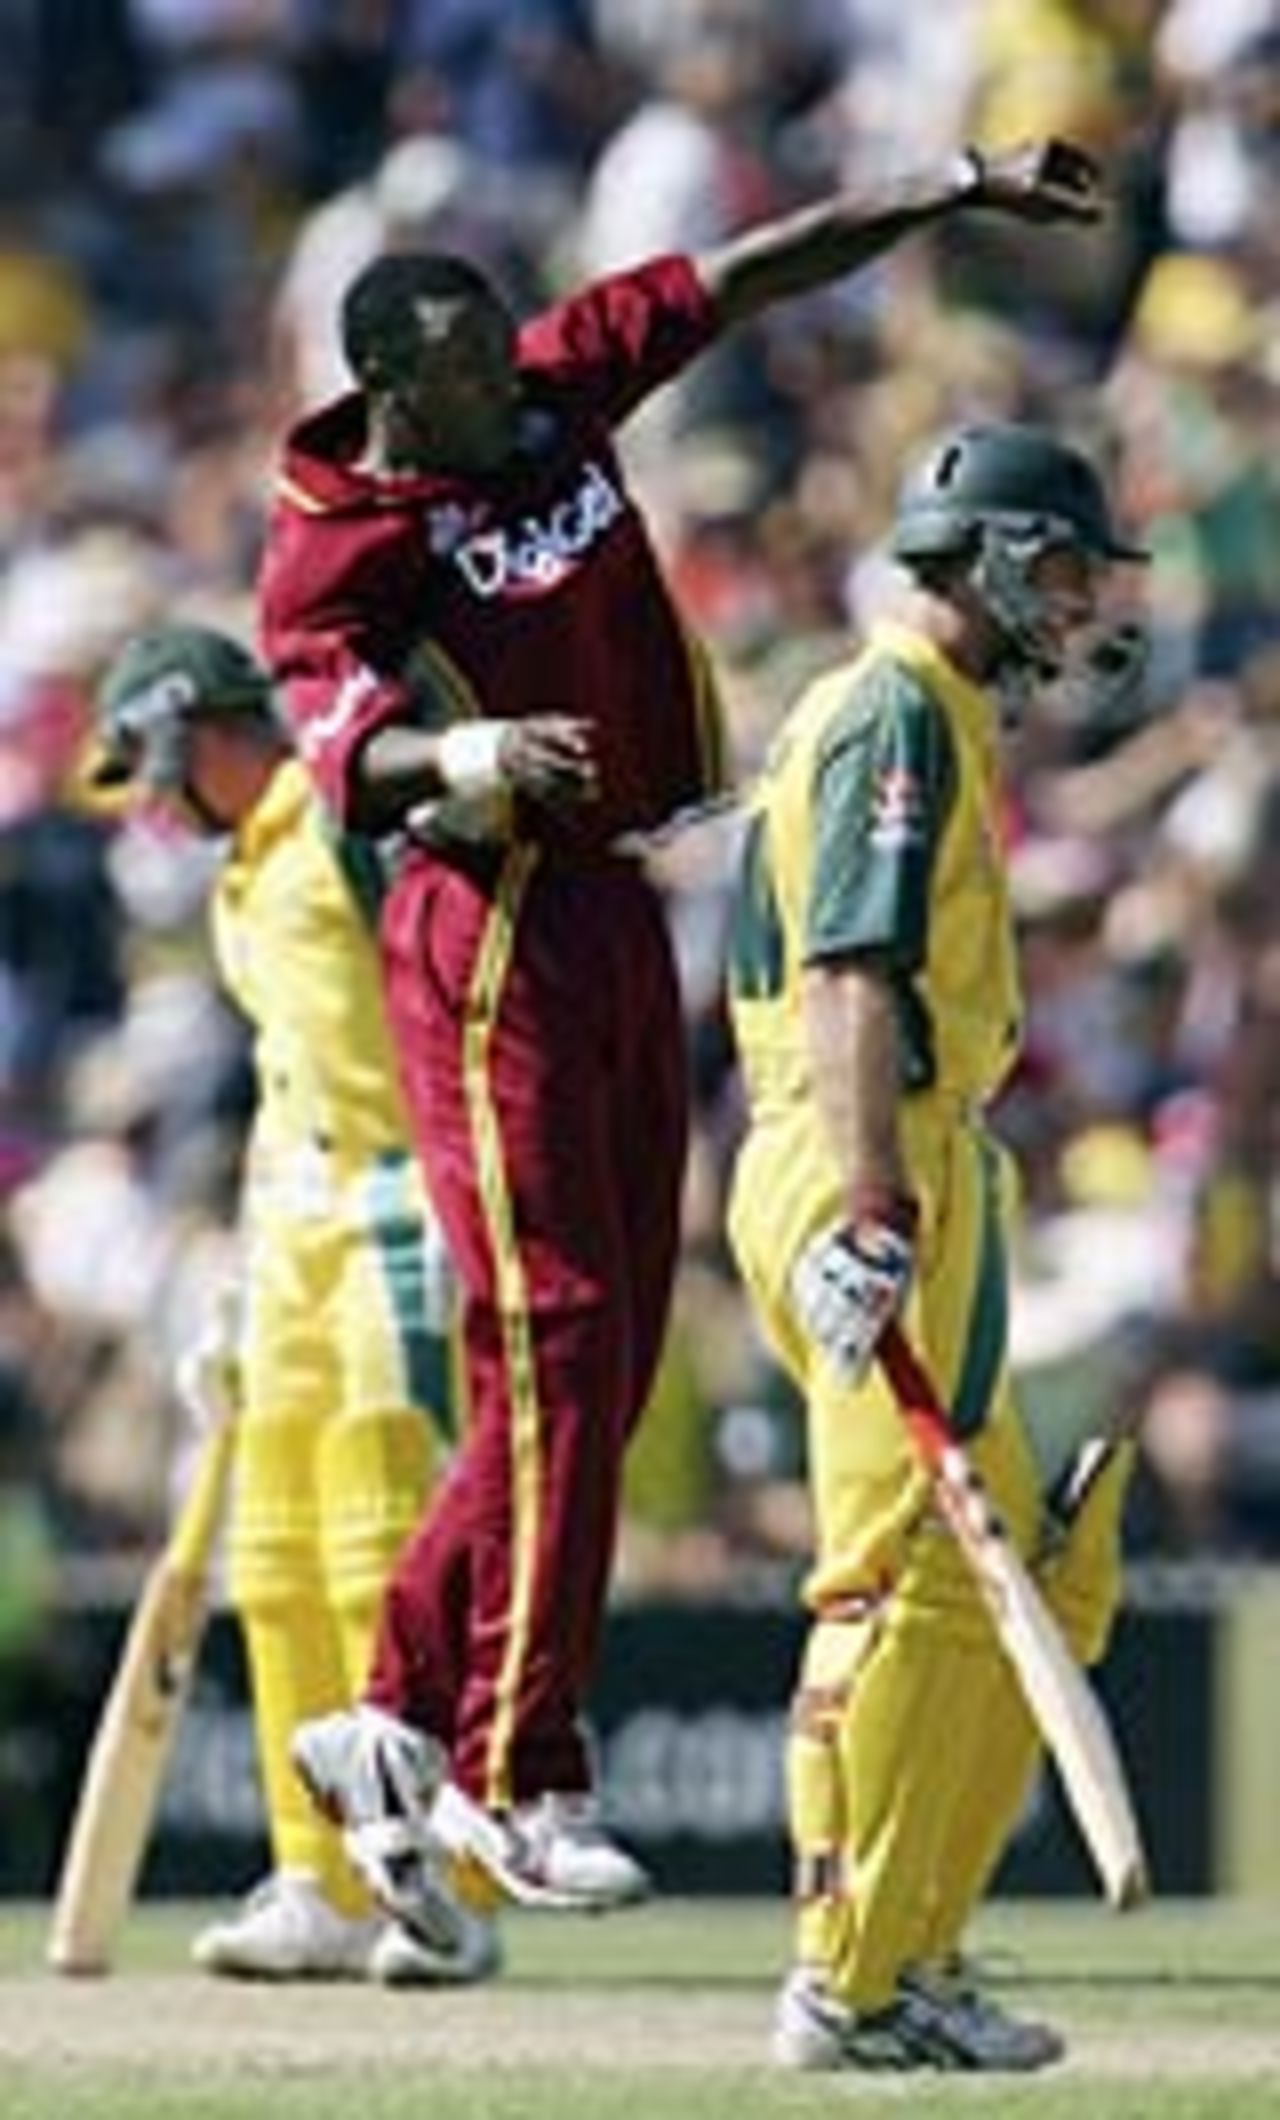 Pedro Collins celebrates after taking the wicket of Simon Katich, Australia v West Indies, VB Series, Adelaide, January 26, 2005